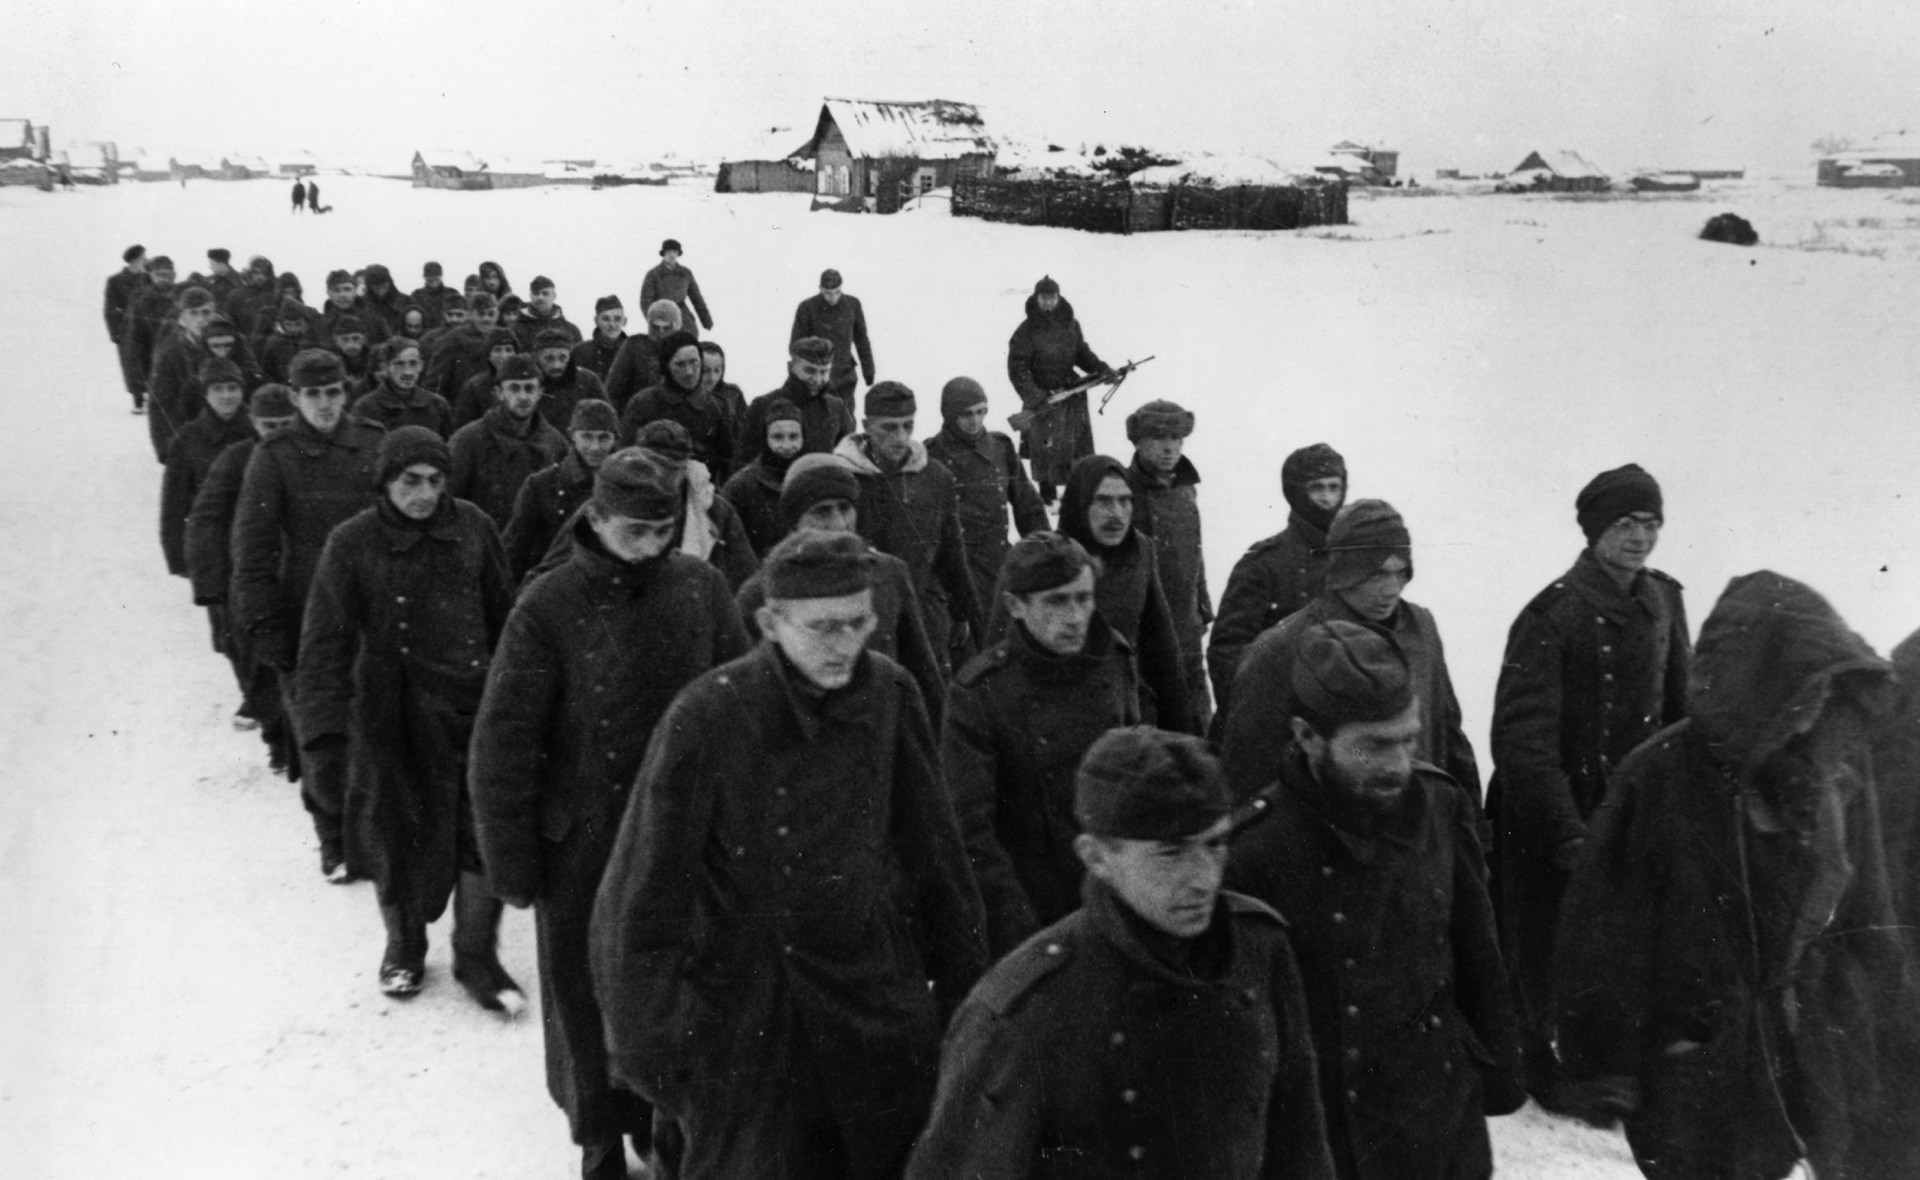 German soldiers, captured - partly because of Sudoplatov's work during the war.